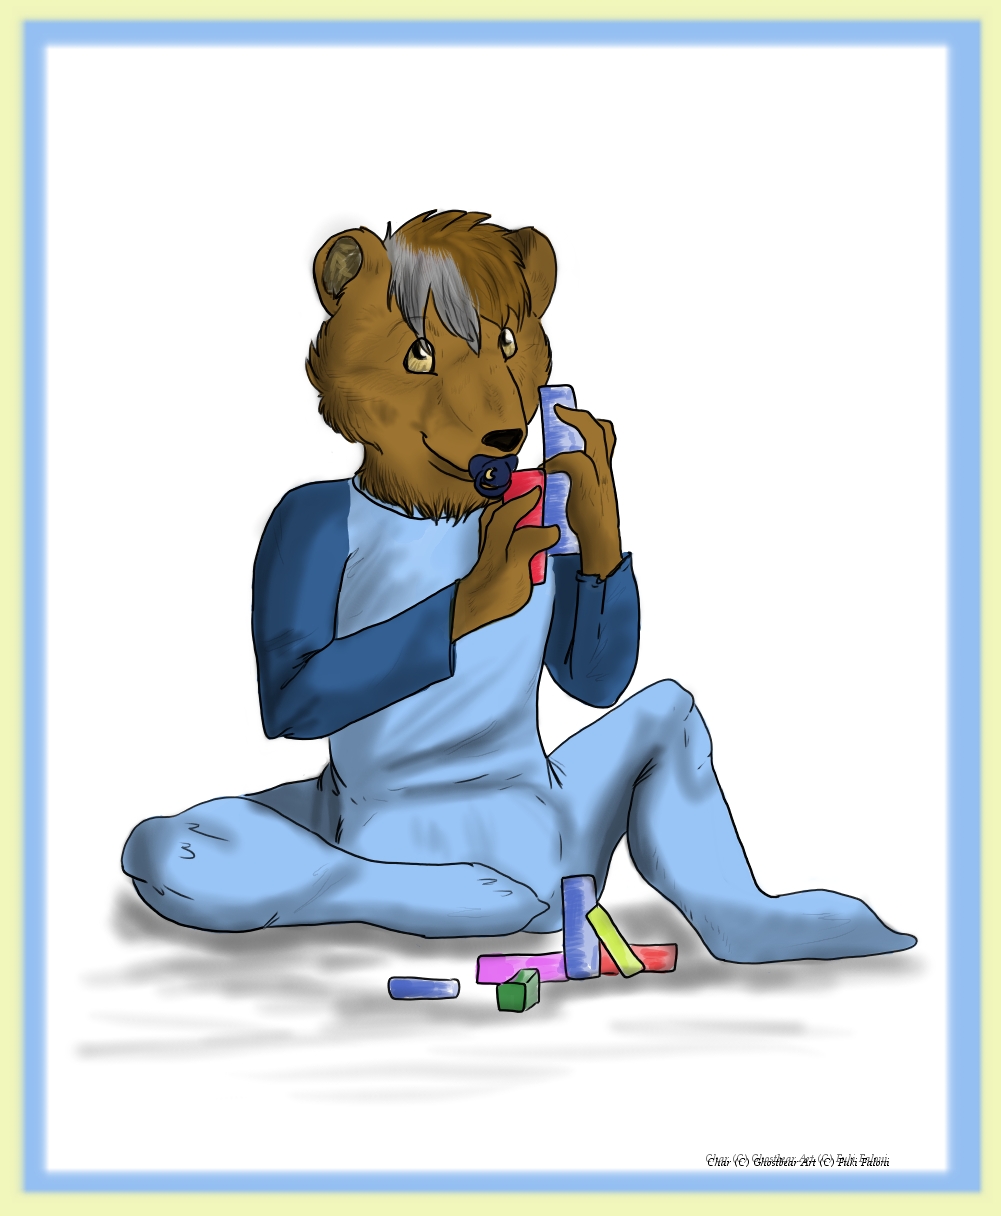 Lil bear and building blocks